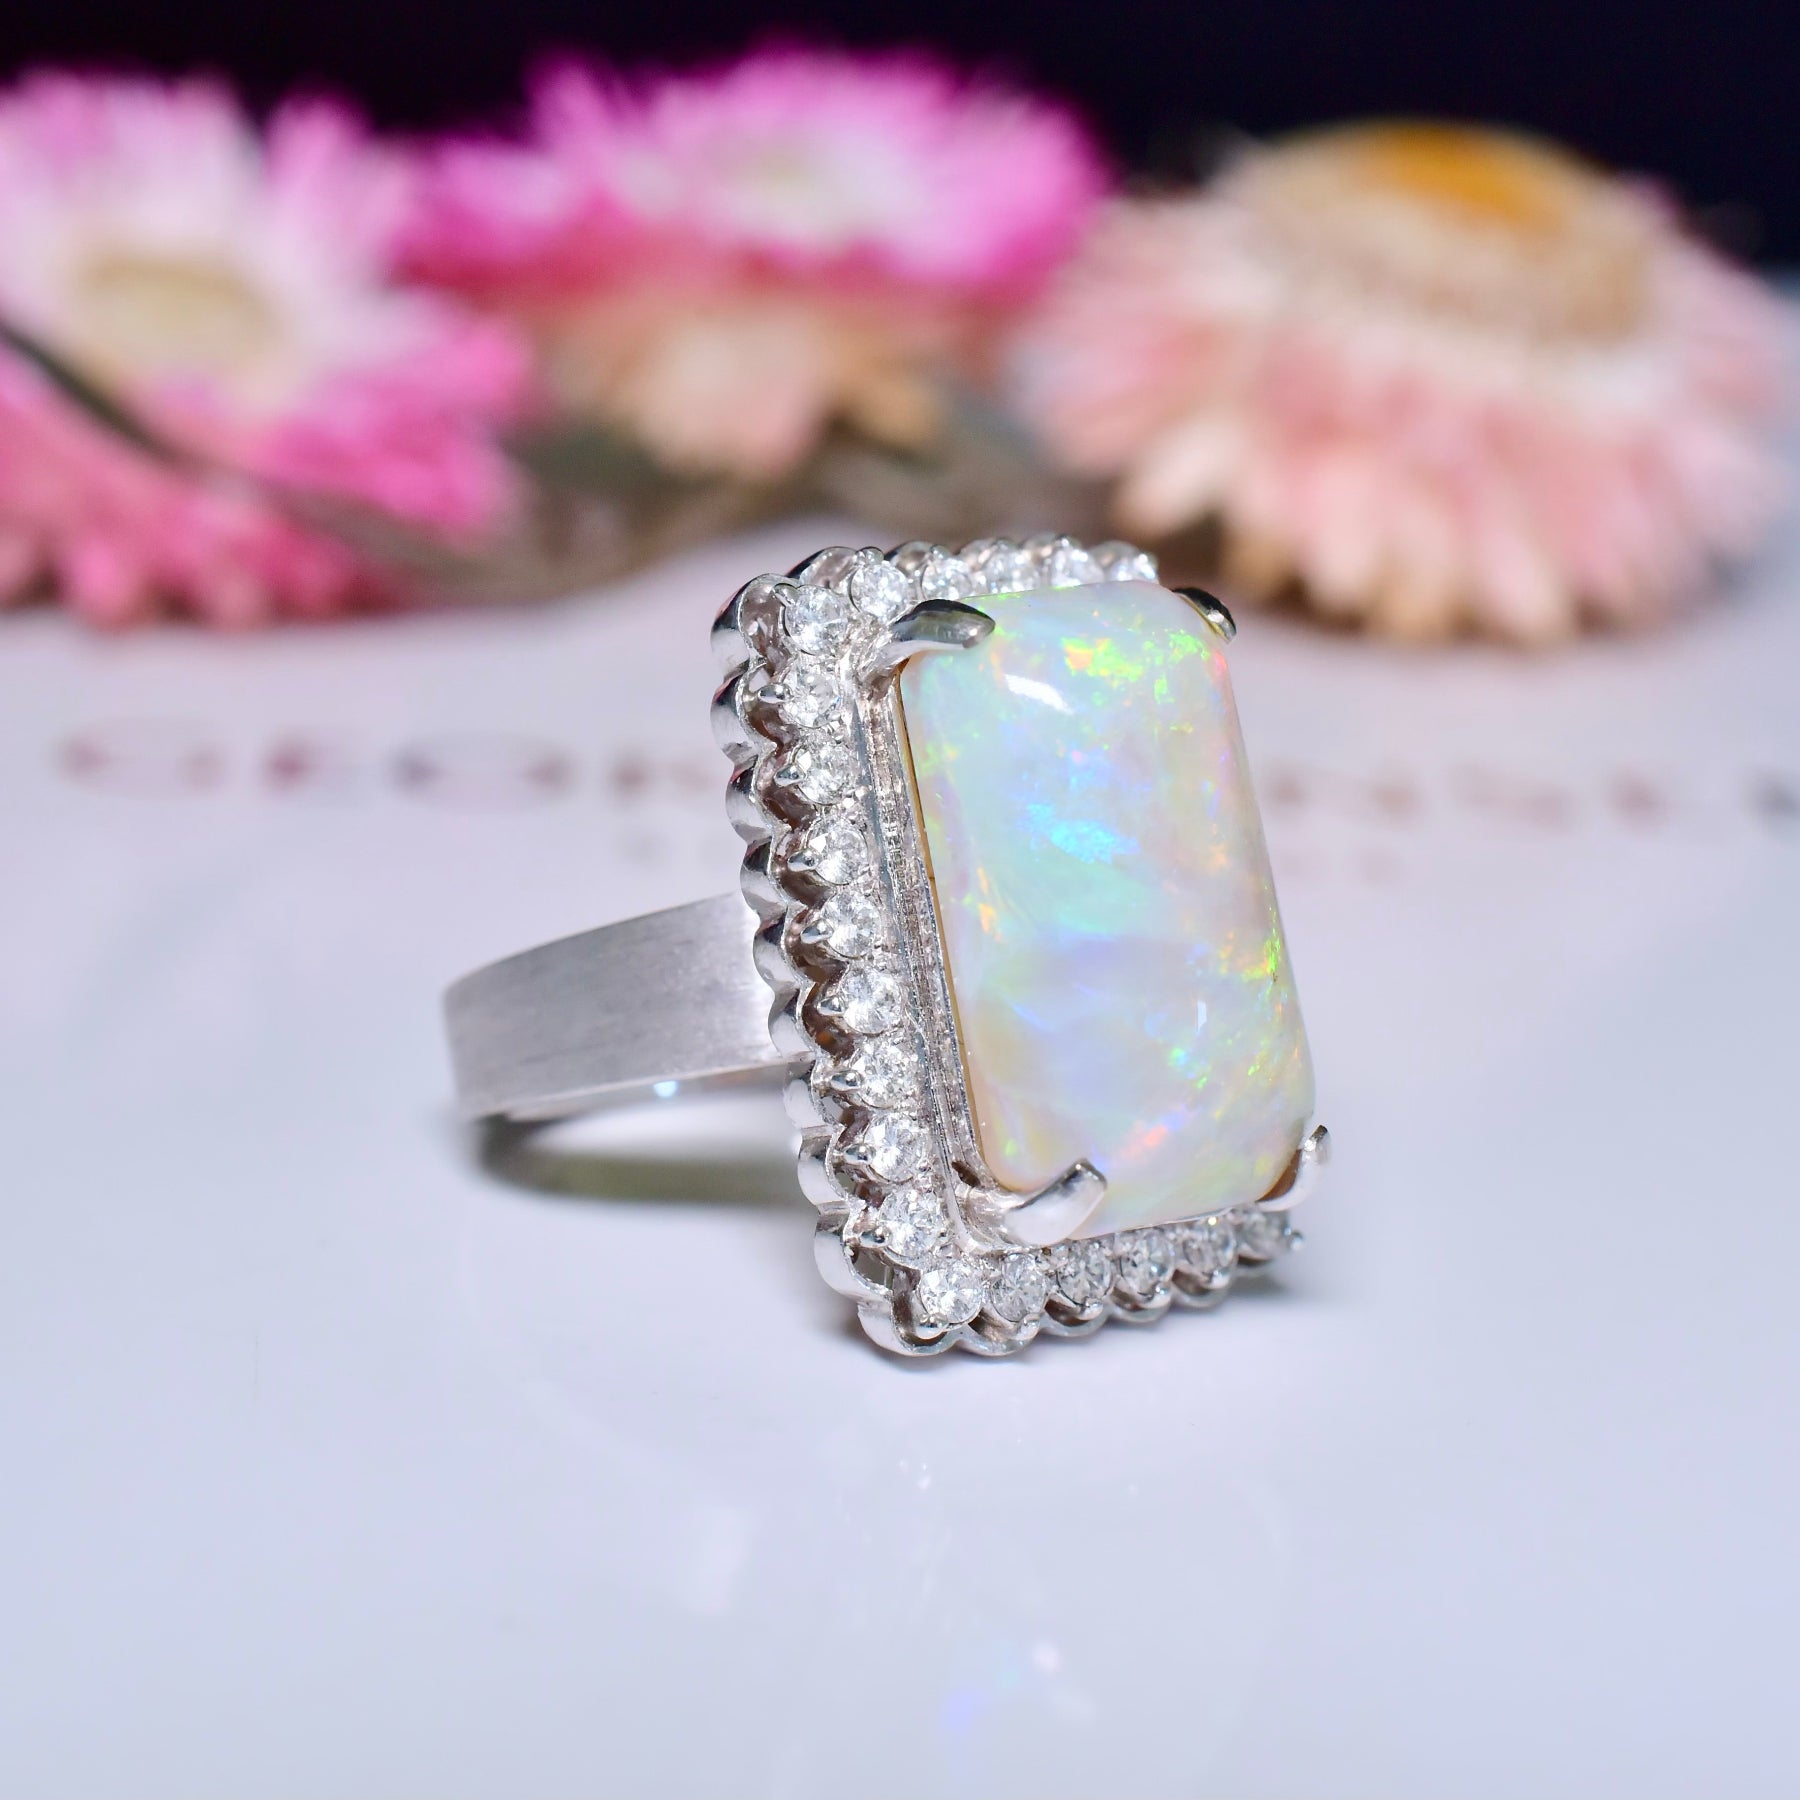 Contemporary 14ct White Gold Solid White Opal Ring Independent Valuation Included With Purchase $12,400 AUD